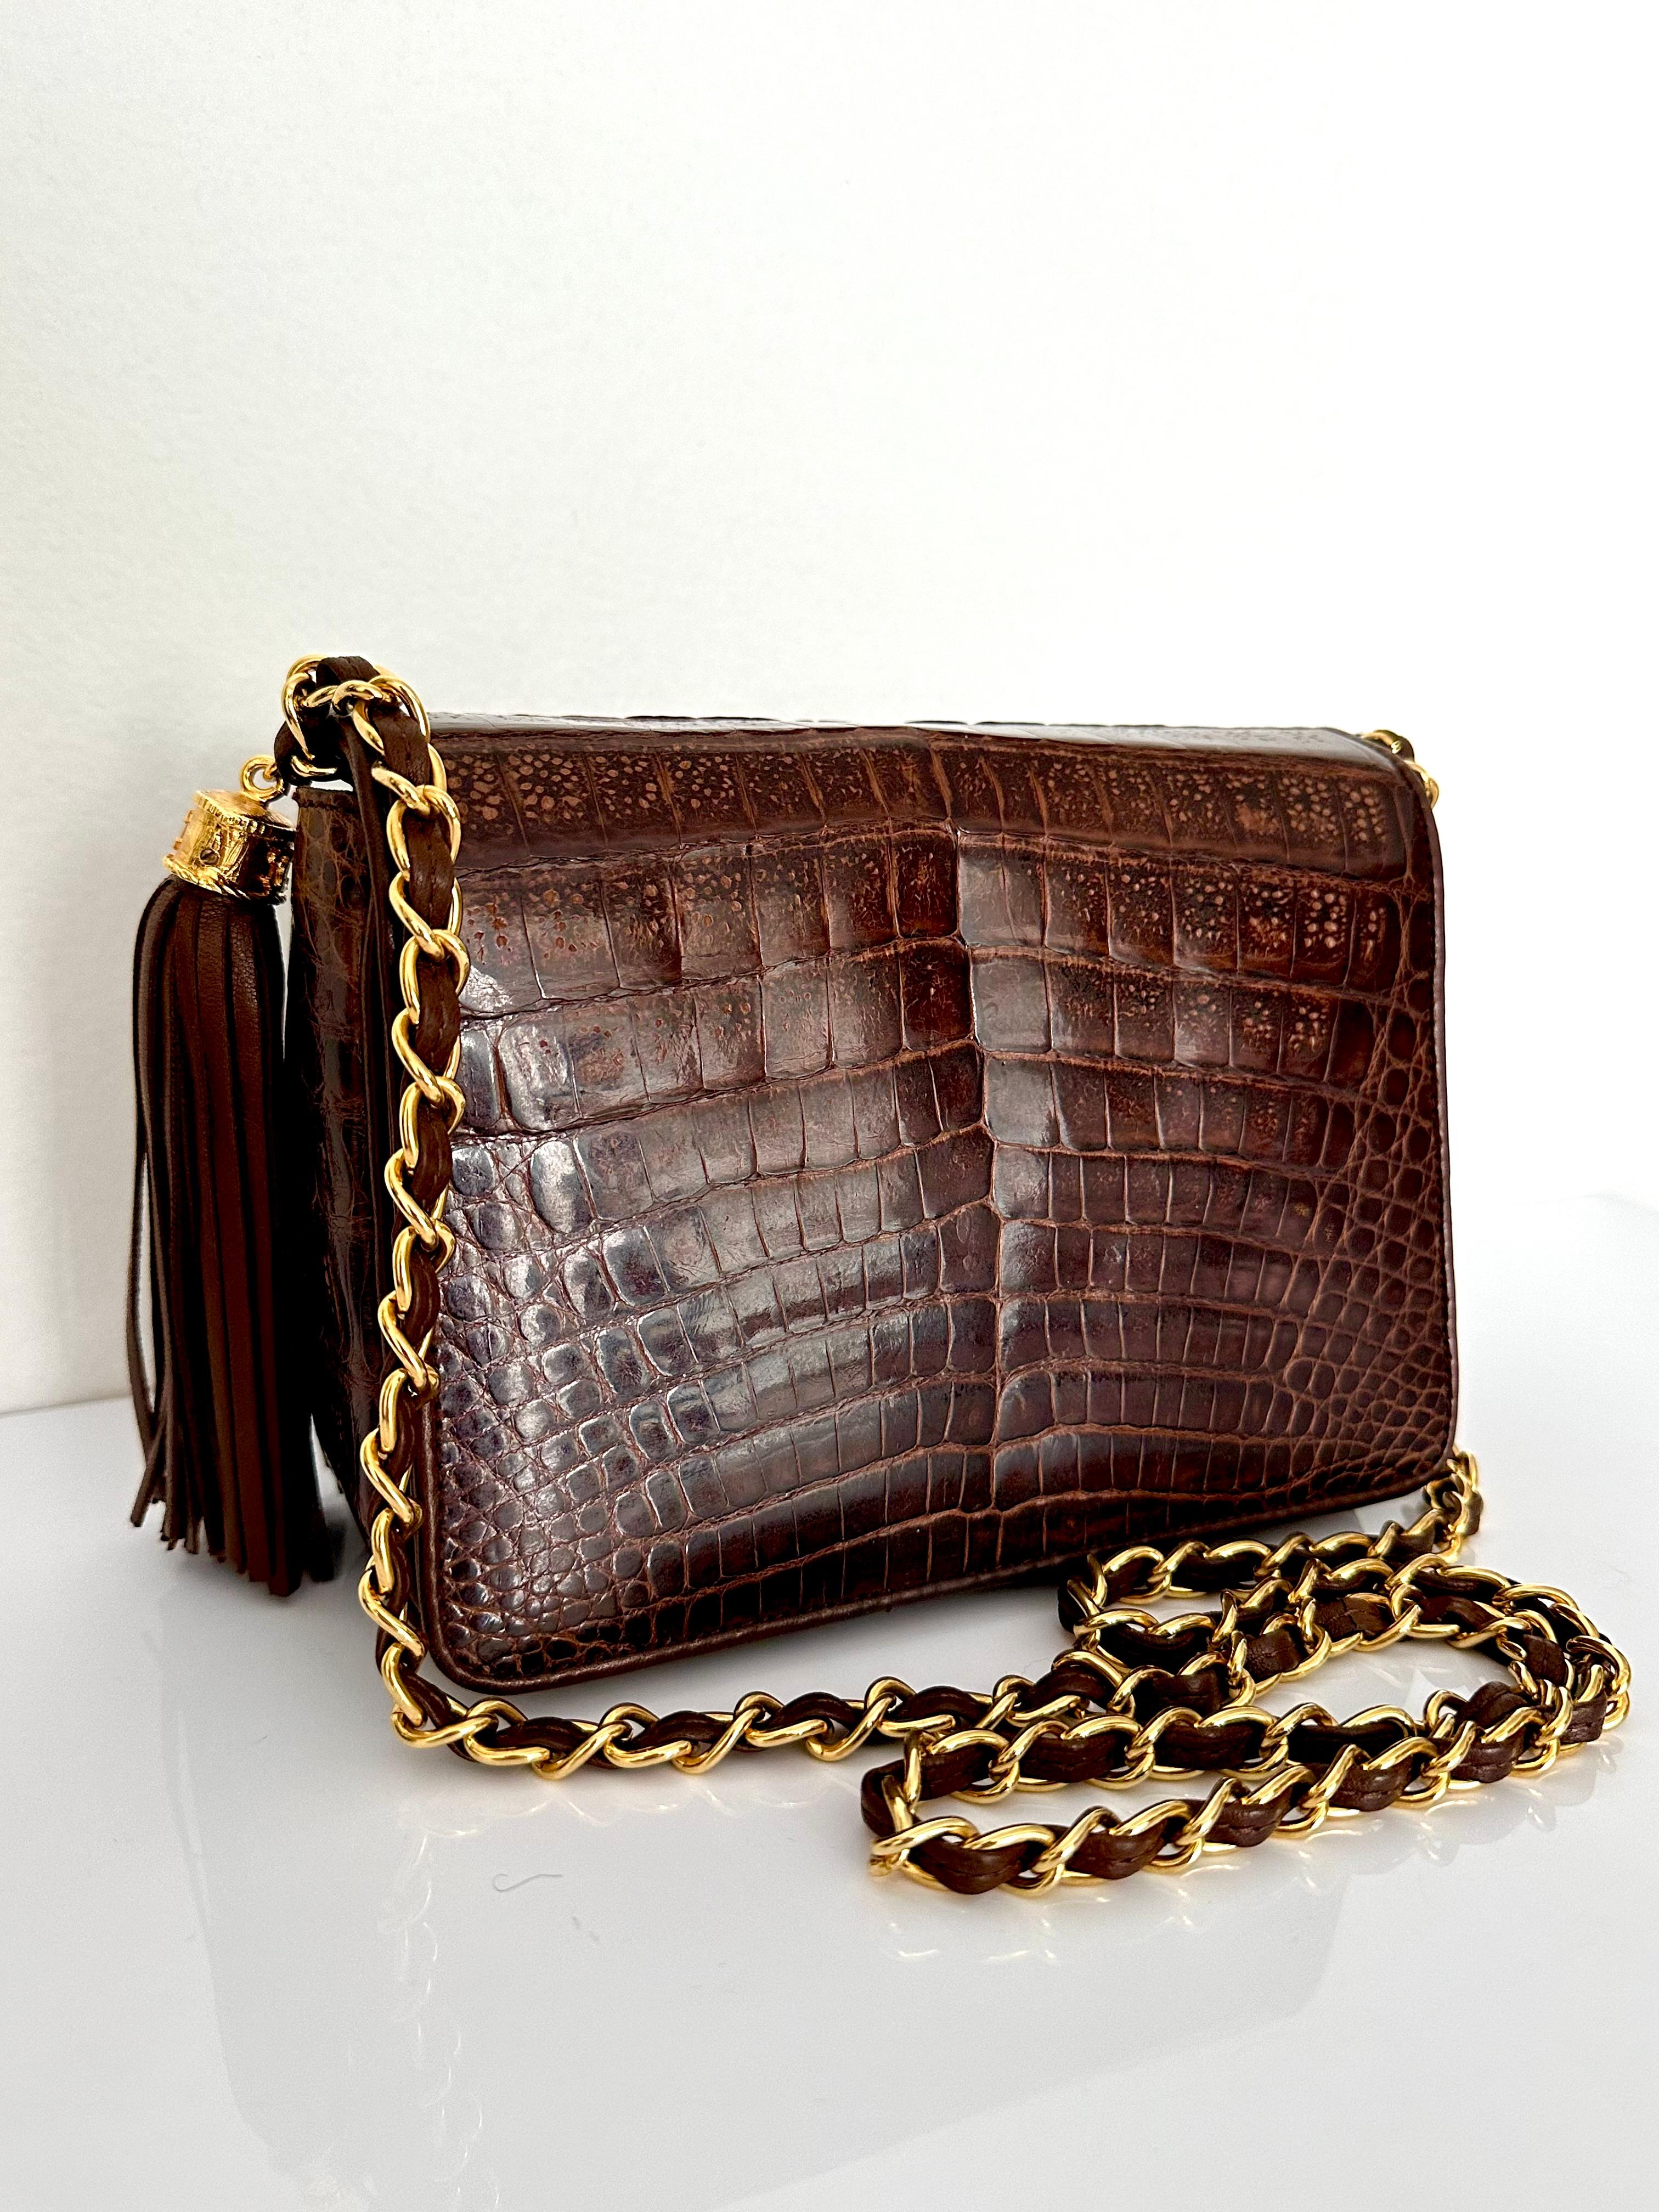 Chanel Crocodile Flap Bag  In Excellent Condition For Sale In Jackson, TN